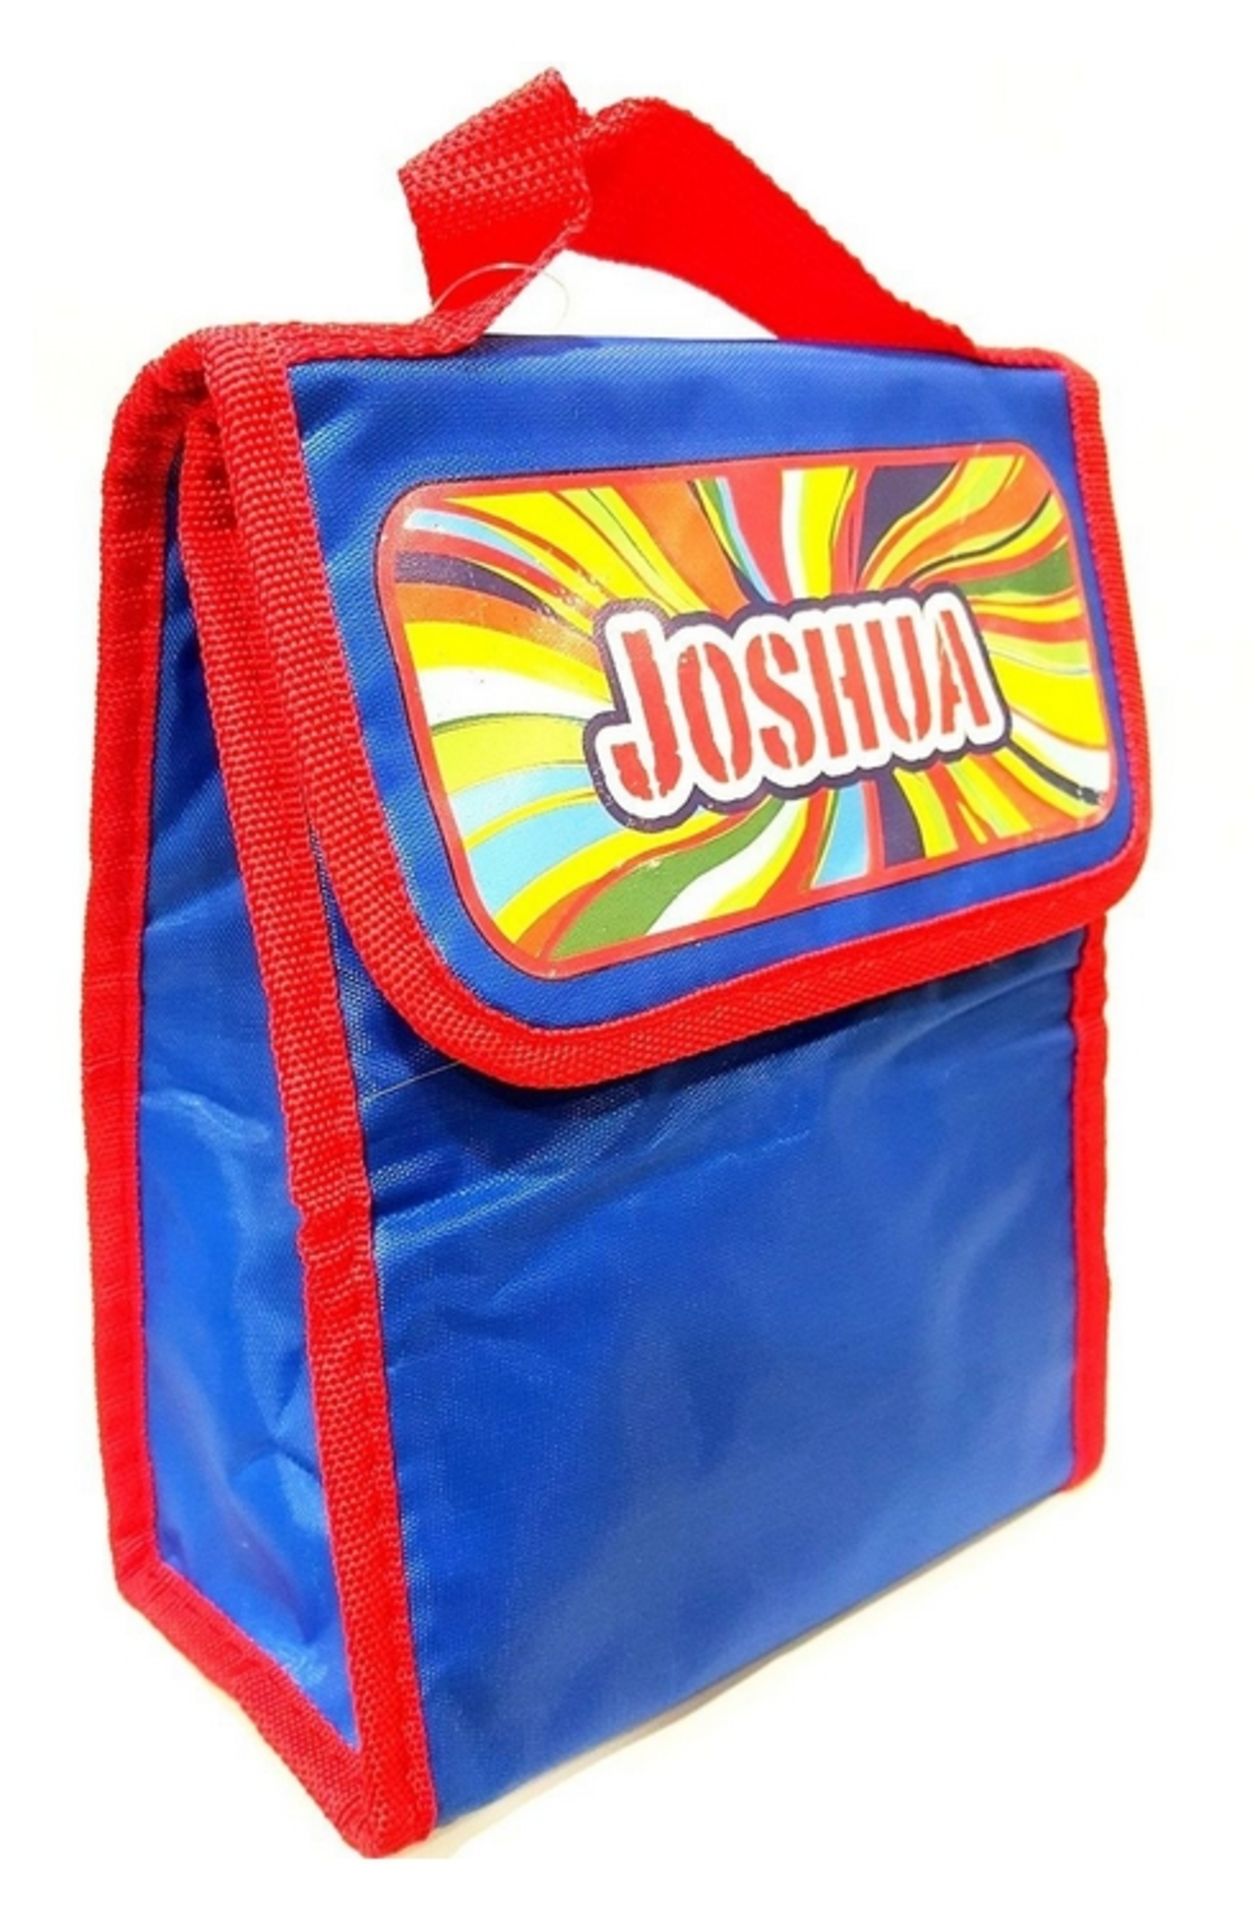 30 Randomly Picked From 100S Of Names Children's Personalised Lunch Bags Insulated Lunch Bags - Image 4 of 6